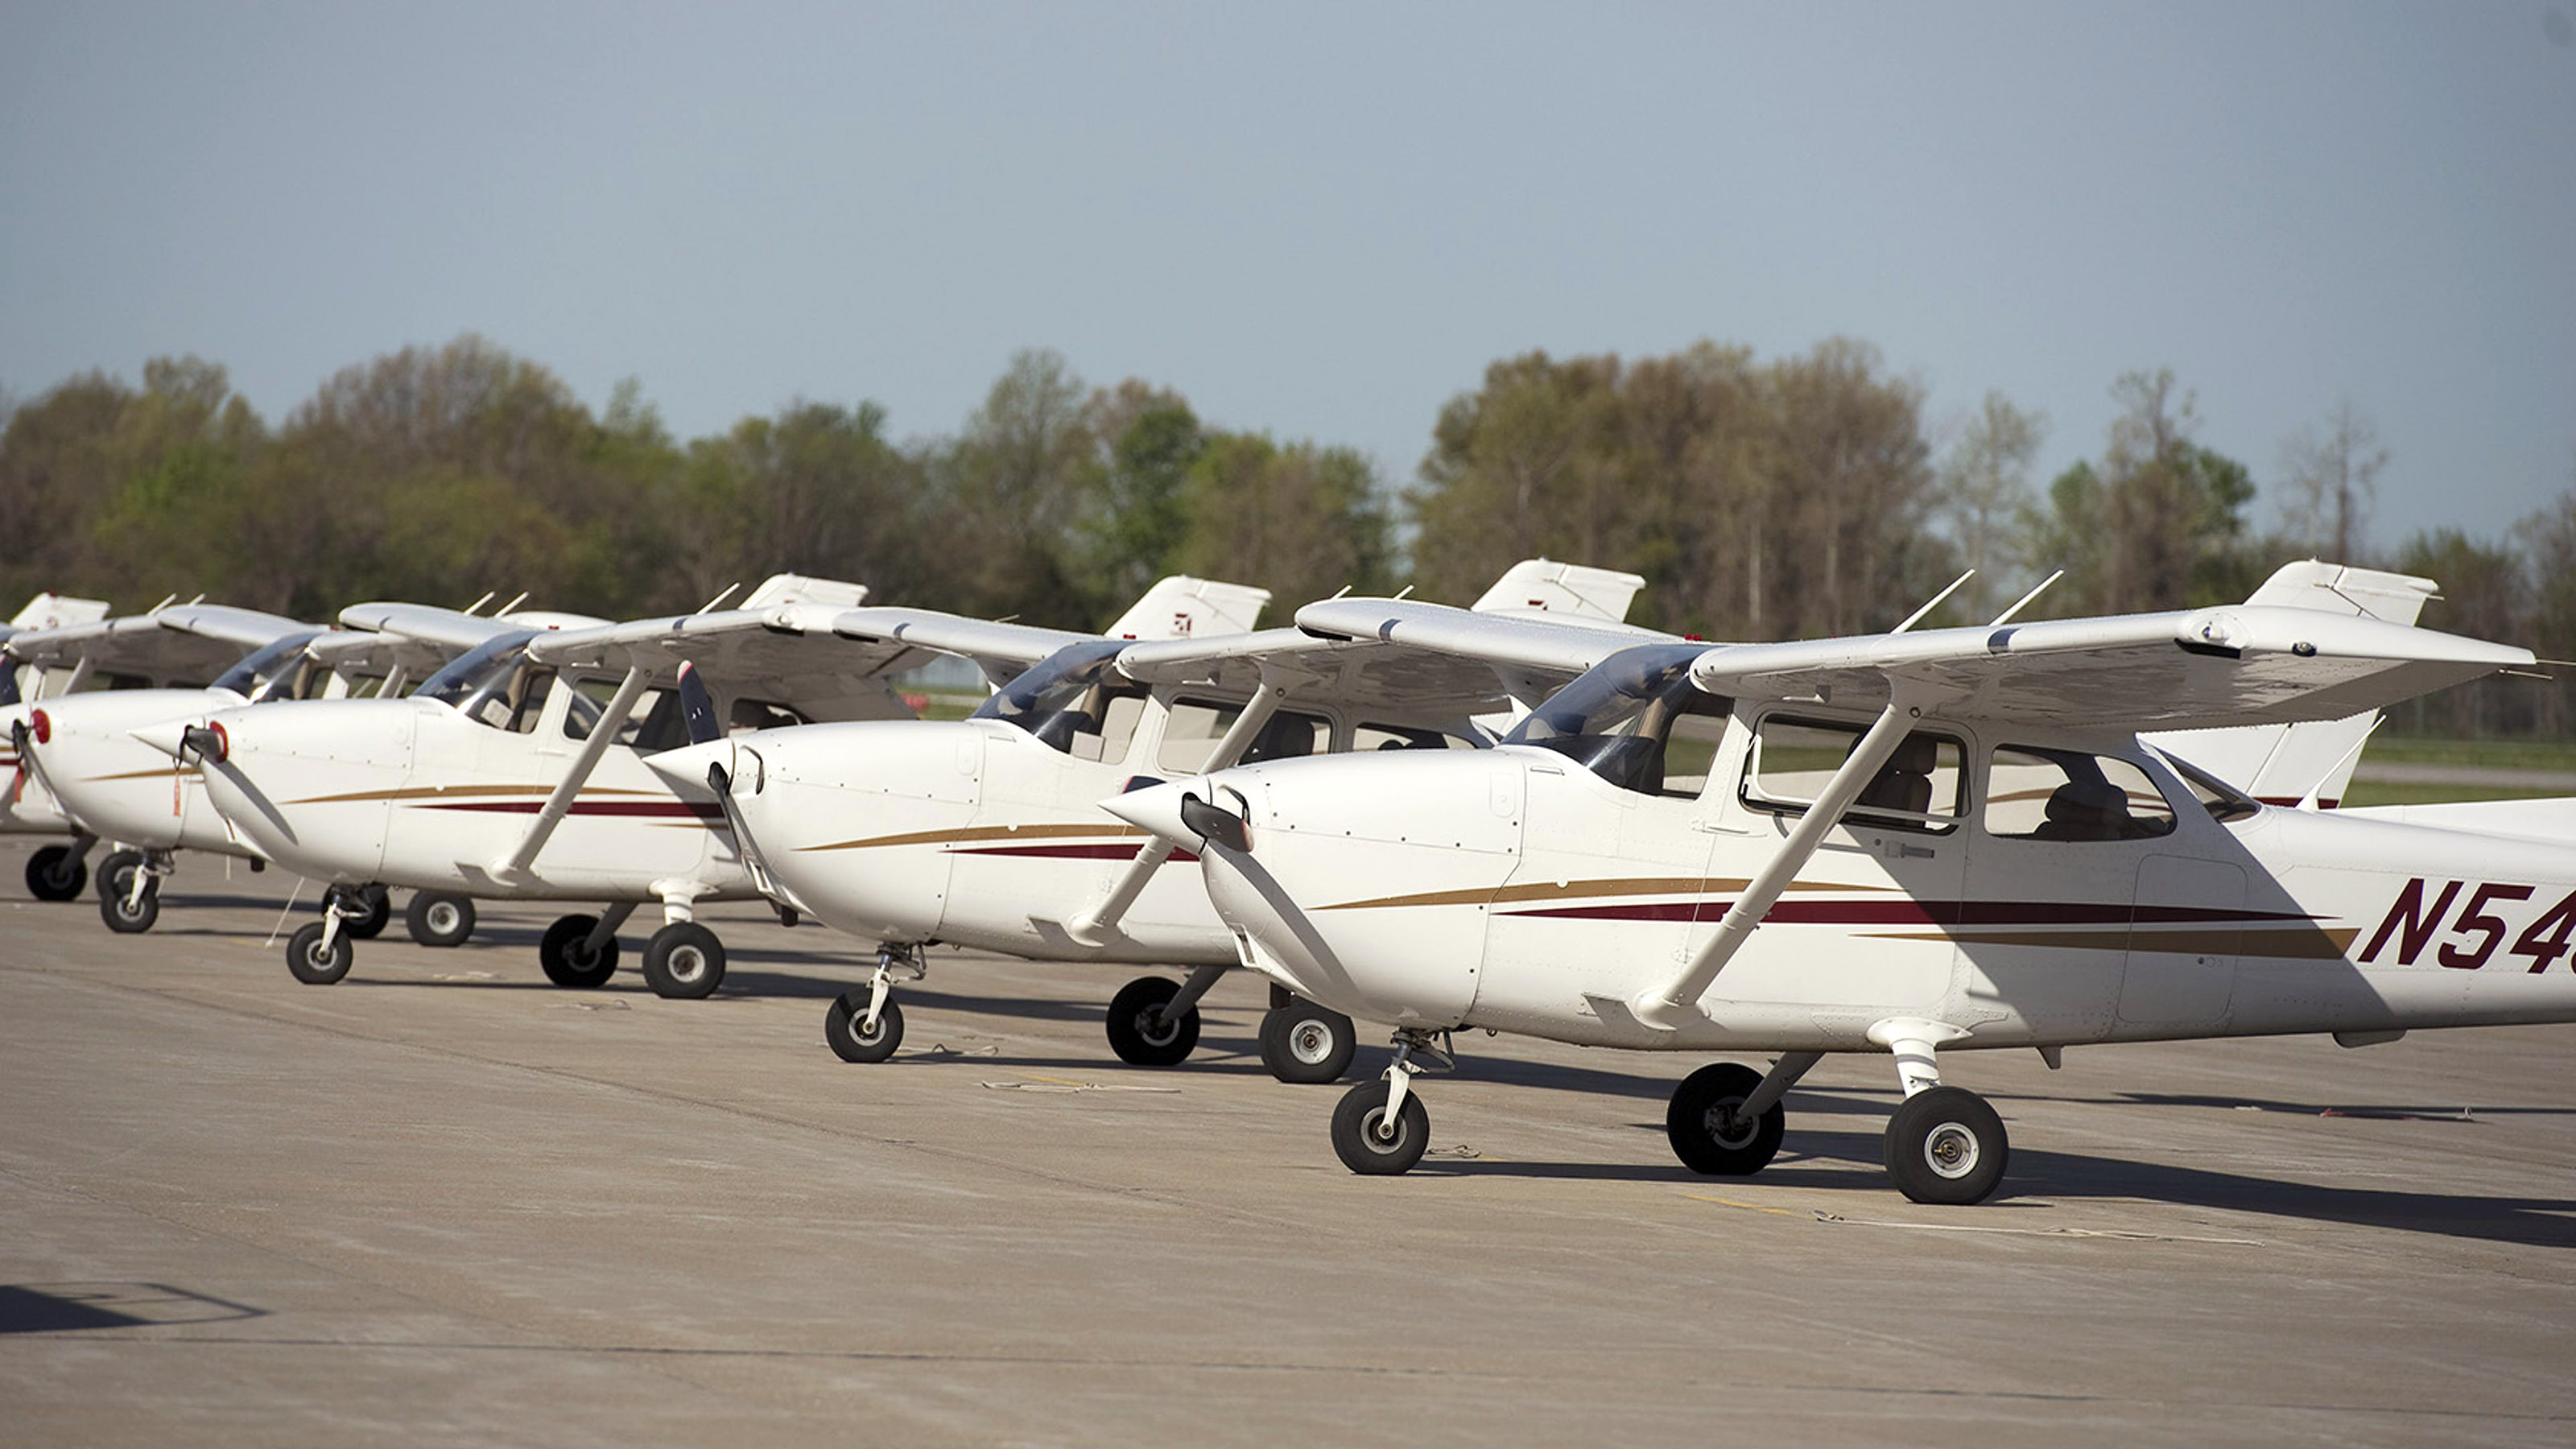 Cessna 172s in the Southern Illinois University Carbondale fleet line the university's ramp at Southern Illinois Airport in Carbondale/Murphysboro, Illinois. Alumni donations are helping to equip the university's fleet with ADS-B hardware in advance of the FAA mandate. Photo courtesy of Southern Illinois University.